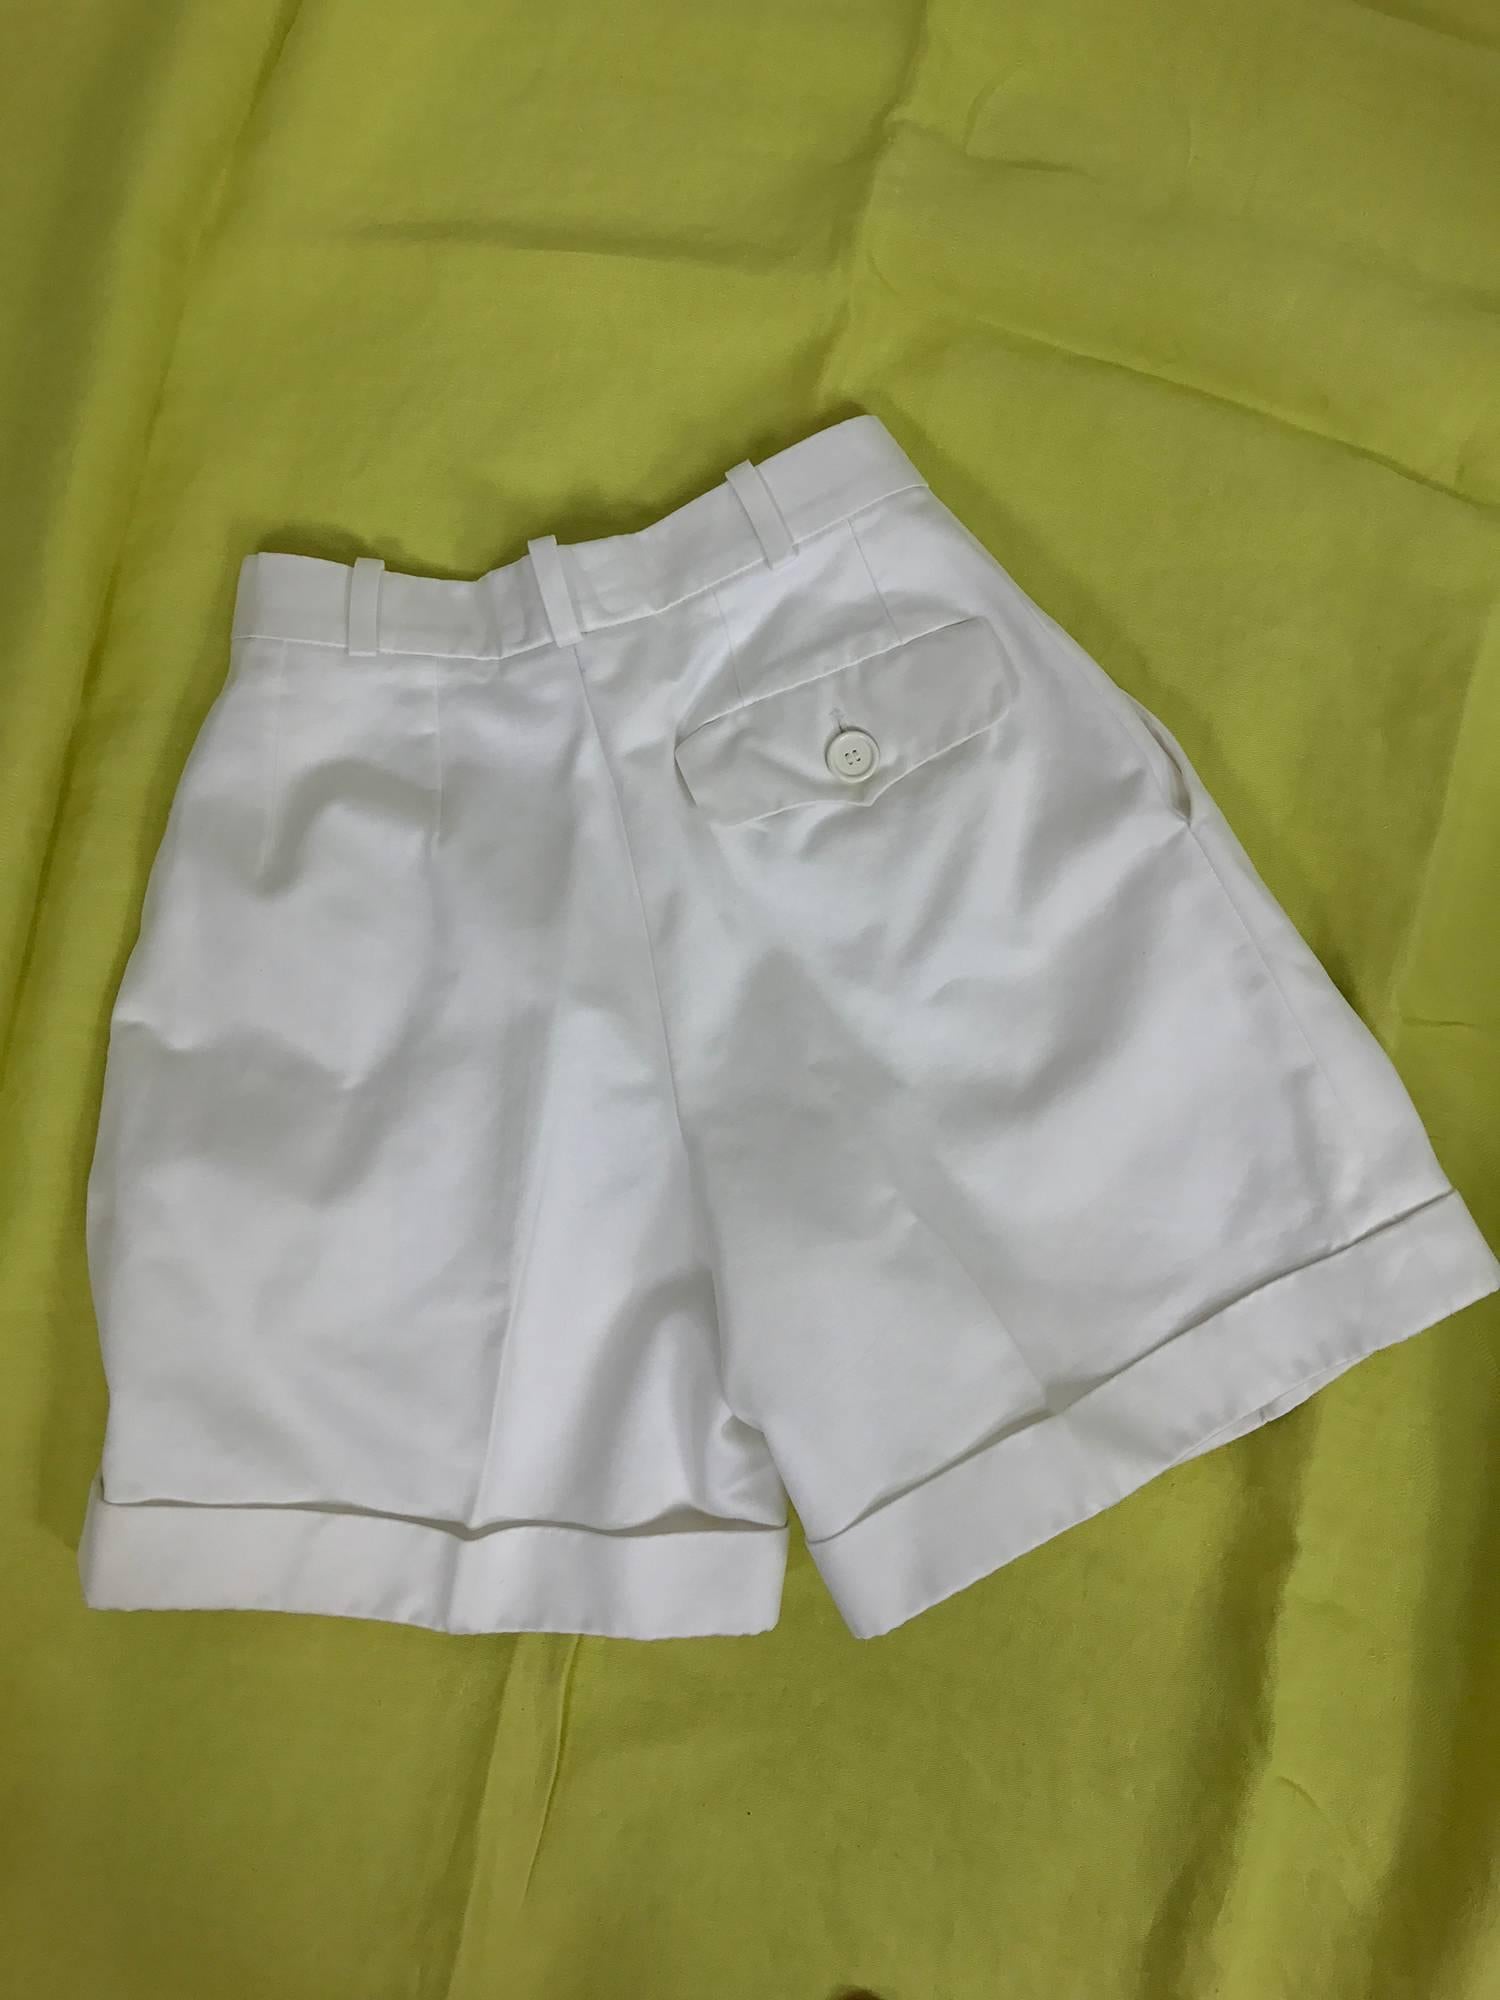 Yves Saint Laurent Rive gauche white cotton twill shorts from the 1970s...Fitted waist with belt loops, angled side pockets, single button flap back pocket...Cuffed leg...Fly front, button at the waist...Marked size 34, fits like a 2-4.

In